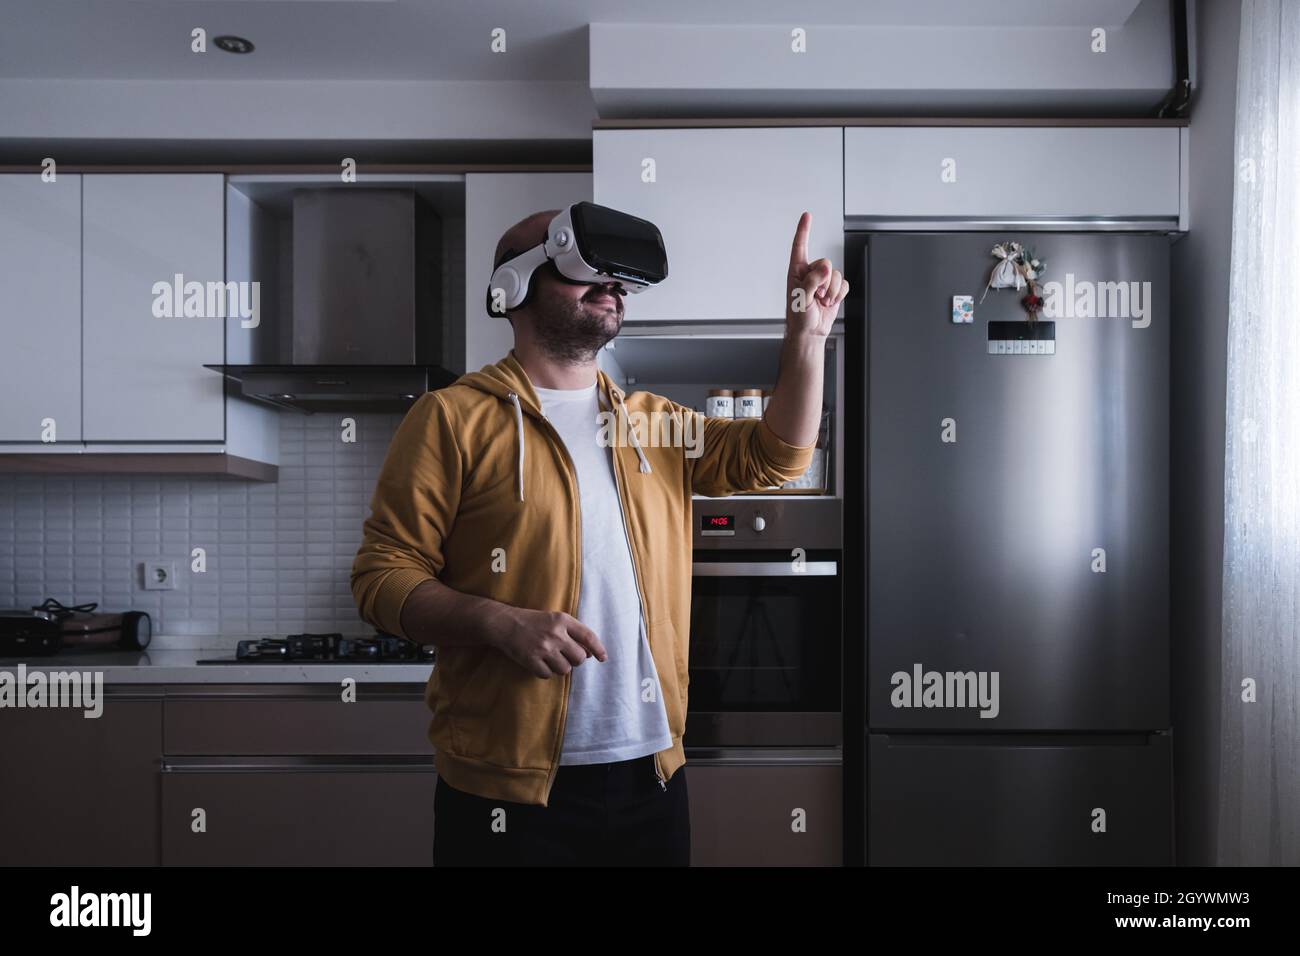 The young man who entered the world of the metaverse from the kitchen. touching with vr glasses. Stock Photo